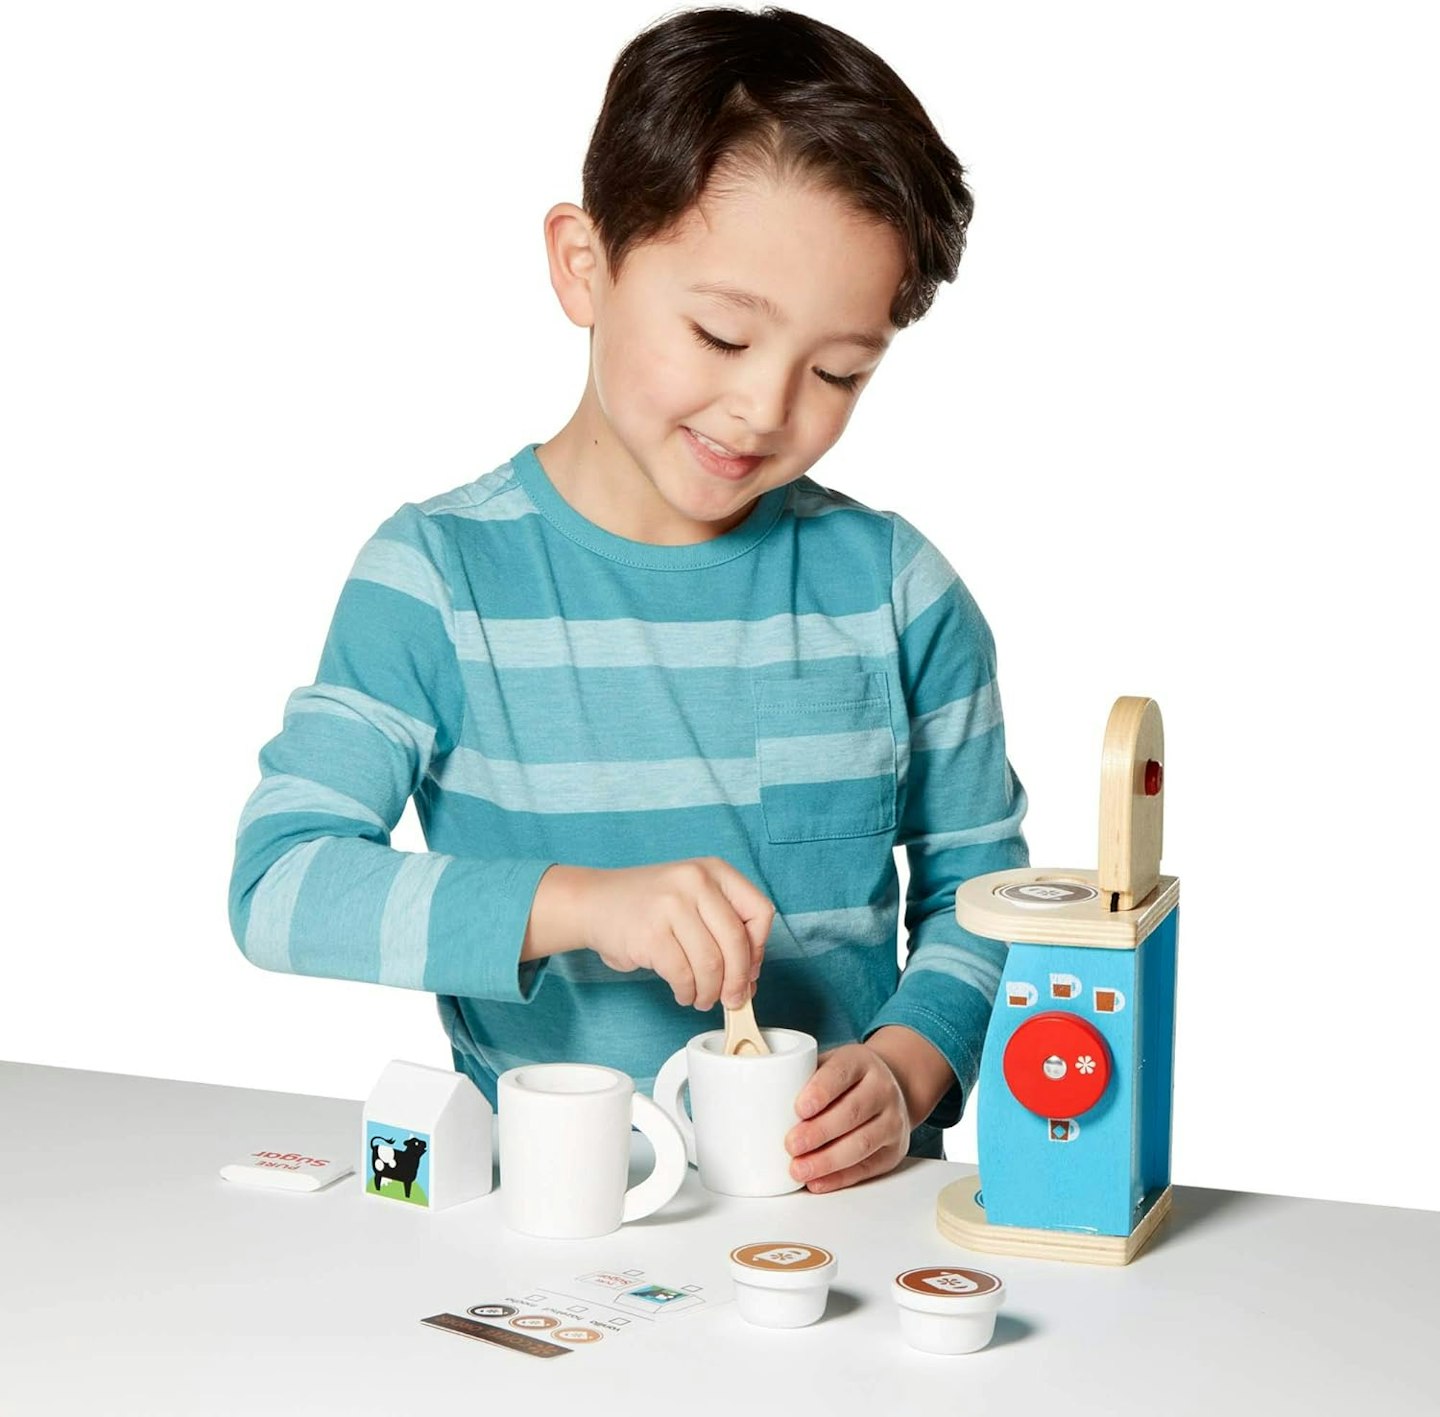 Boy playing at making pretend coffee with a wooden toy coffee machine and accessories